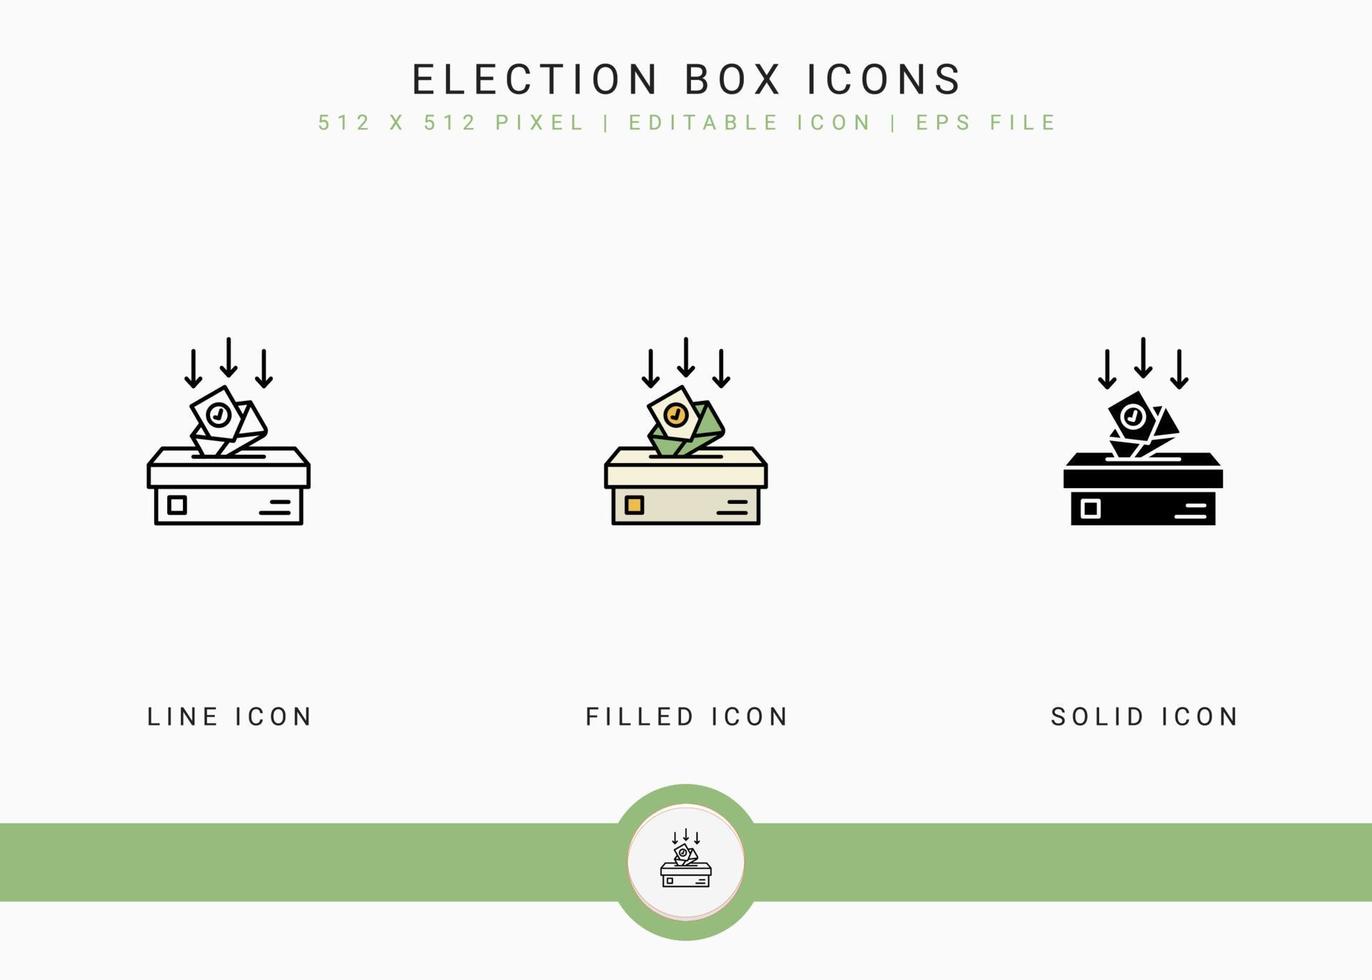 Election box icons set vector illustration with solid icon line style. Government public vote concept. Editable stroke icon on isolated background for web design, user interface, and mobile app